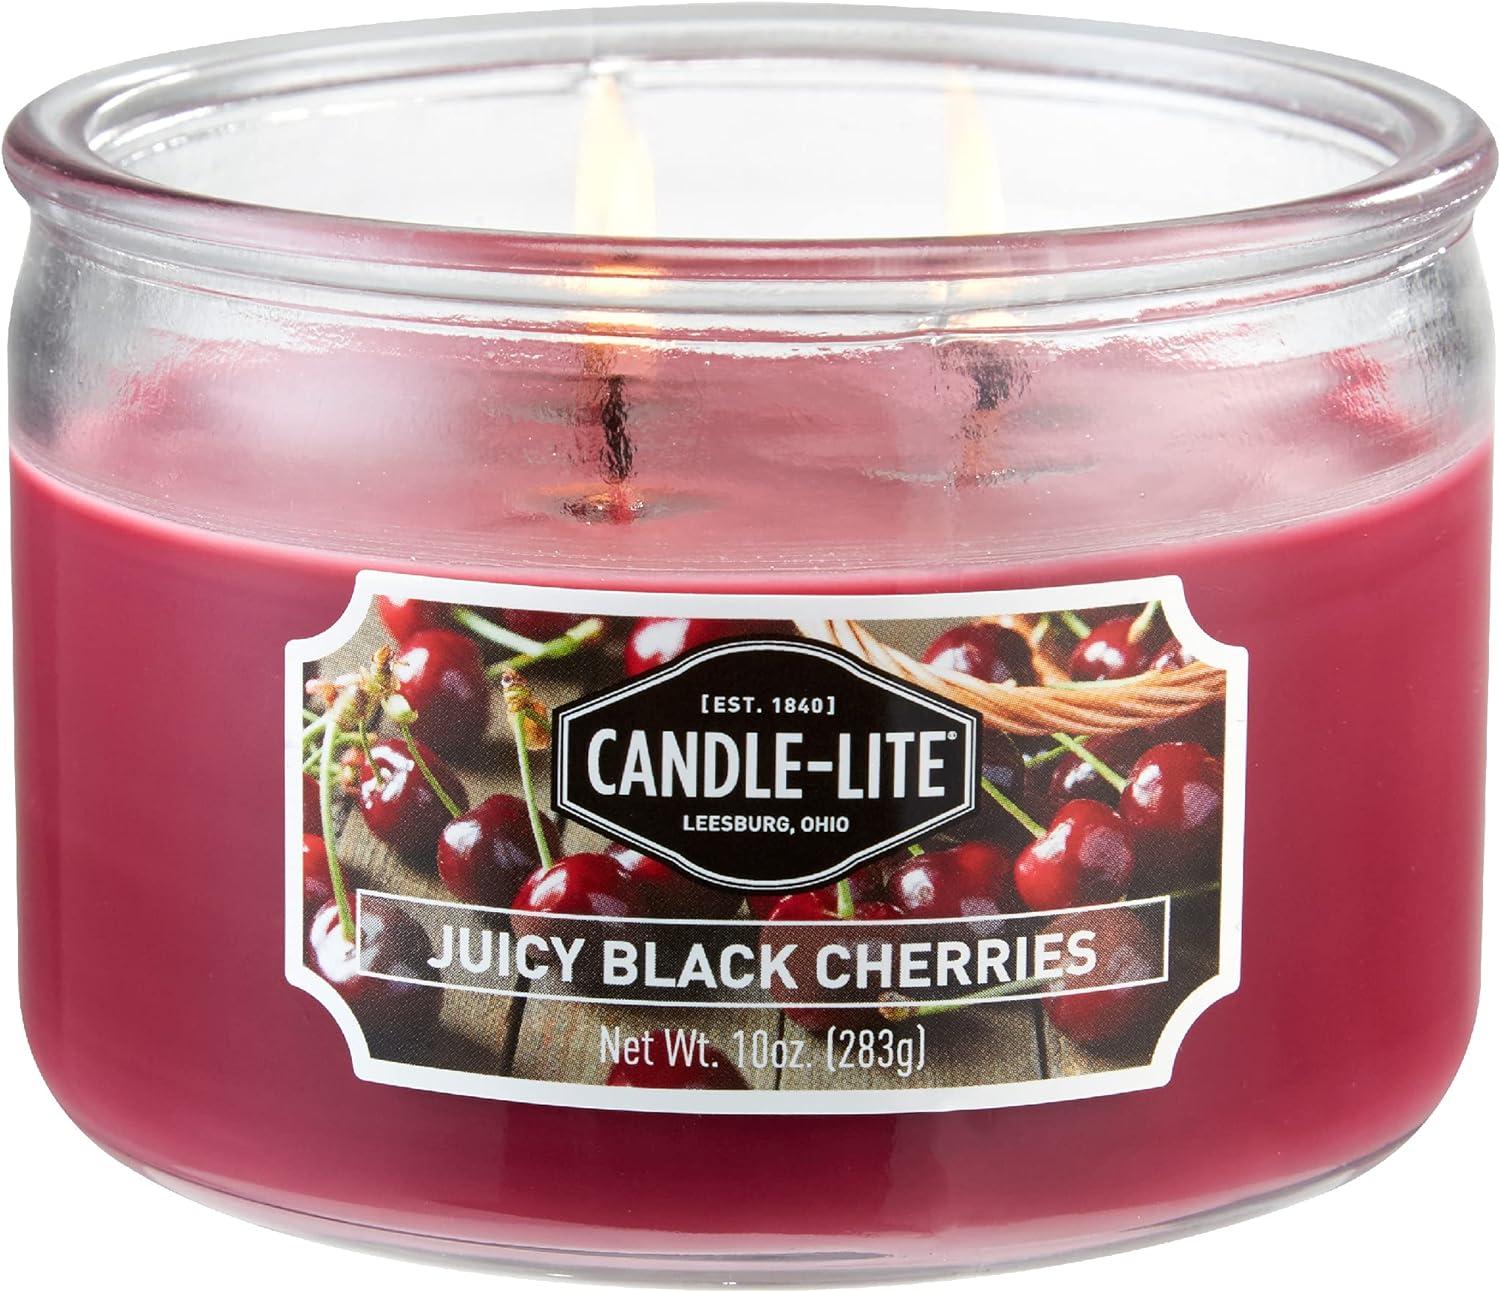 Candle-lite Scented Juicy Black Cherries Fragrance for $3.99